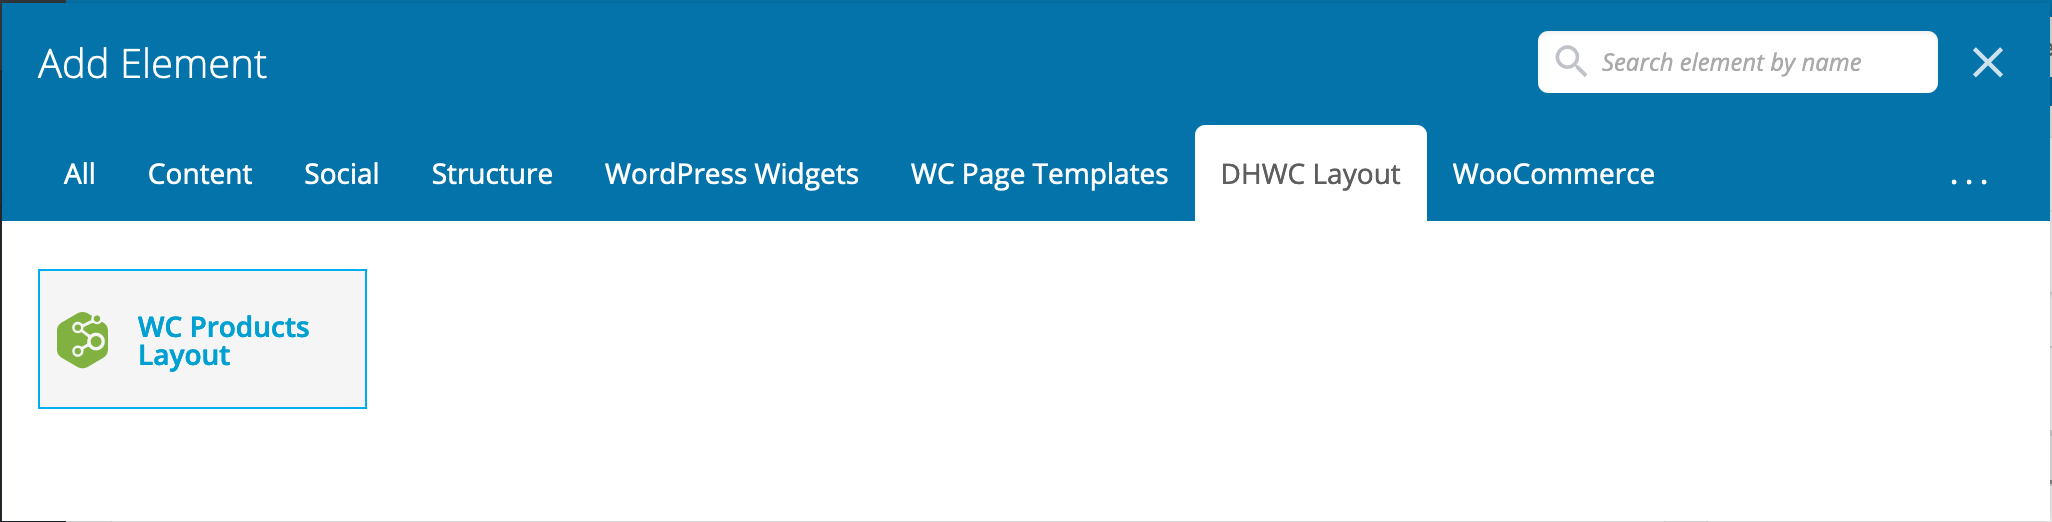 DHWCLayout - Woocommerce Products Layouts - 2